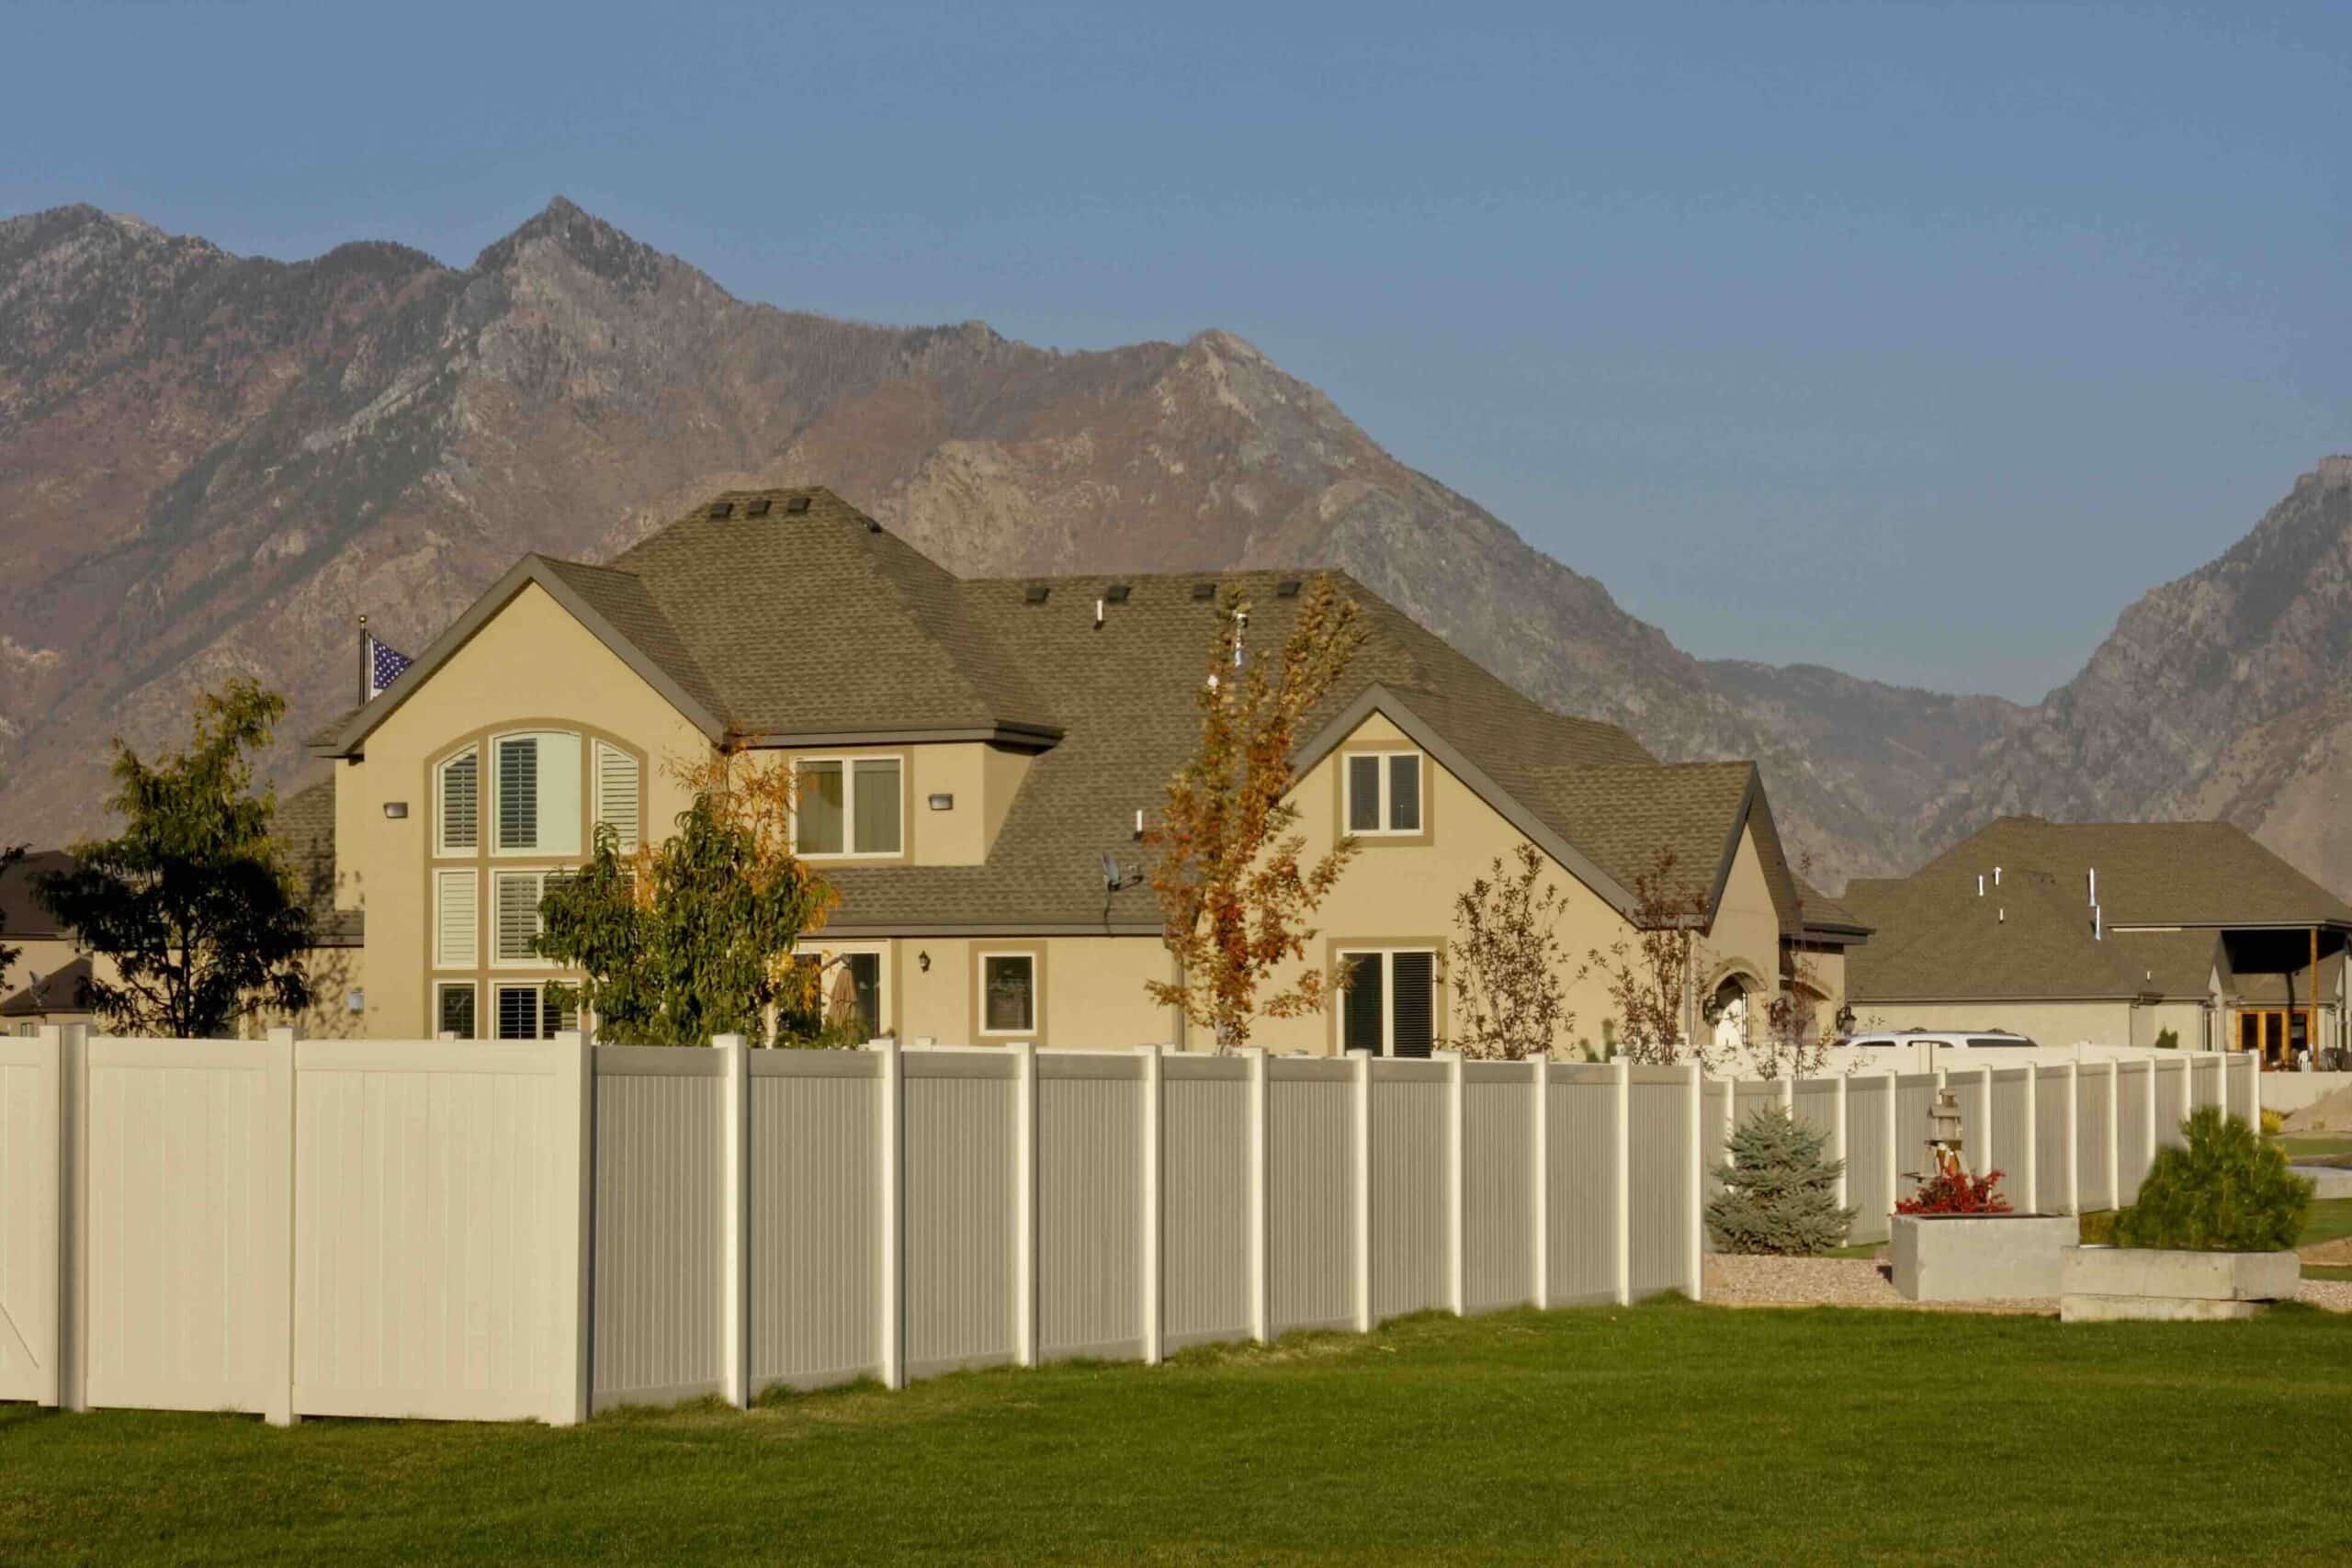 vinyl privacy fence in front of utah mountains